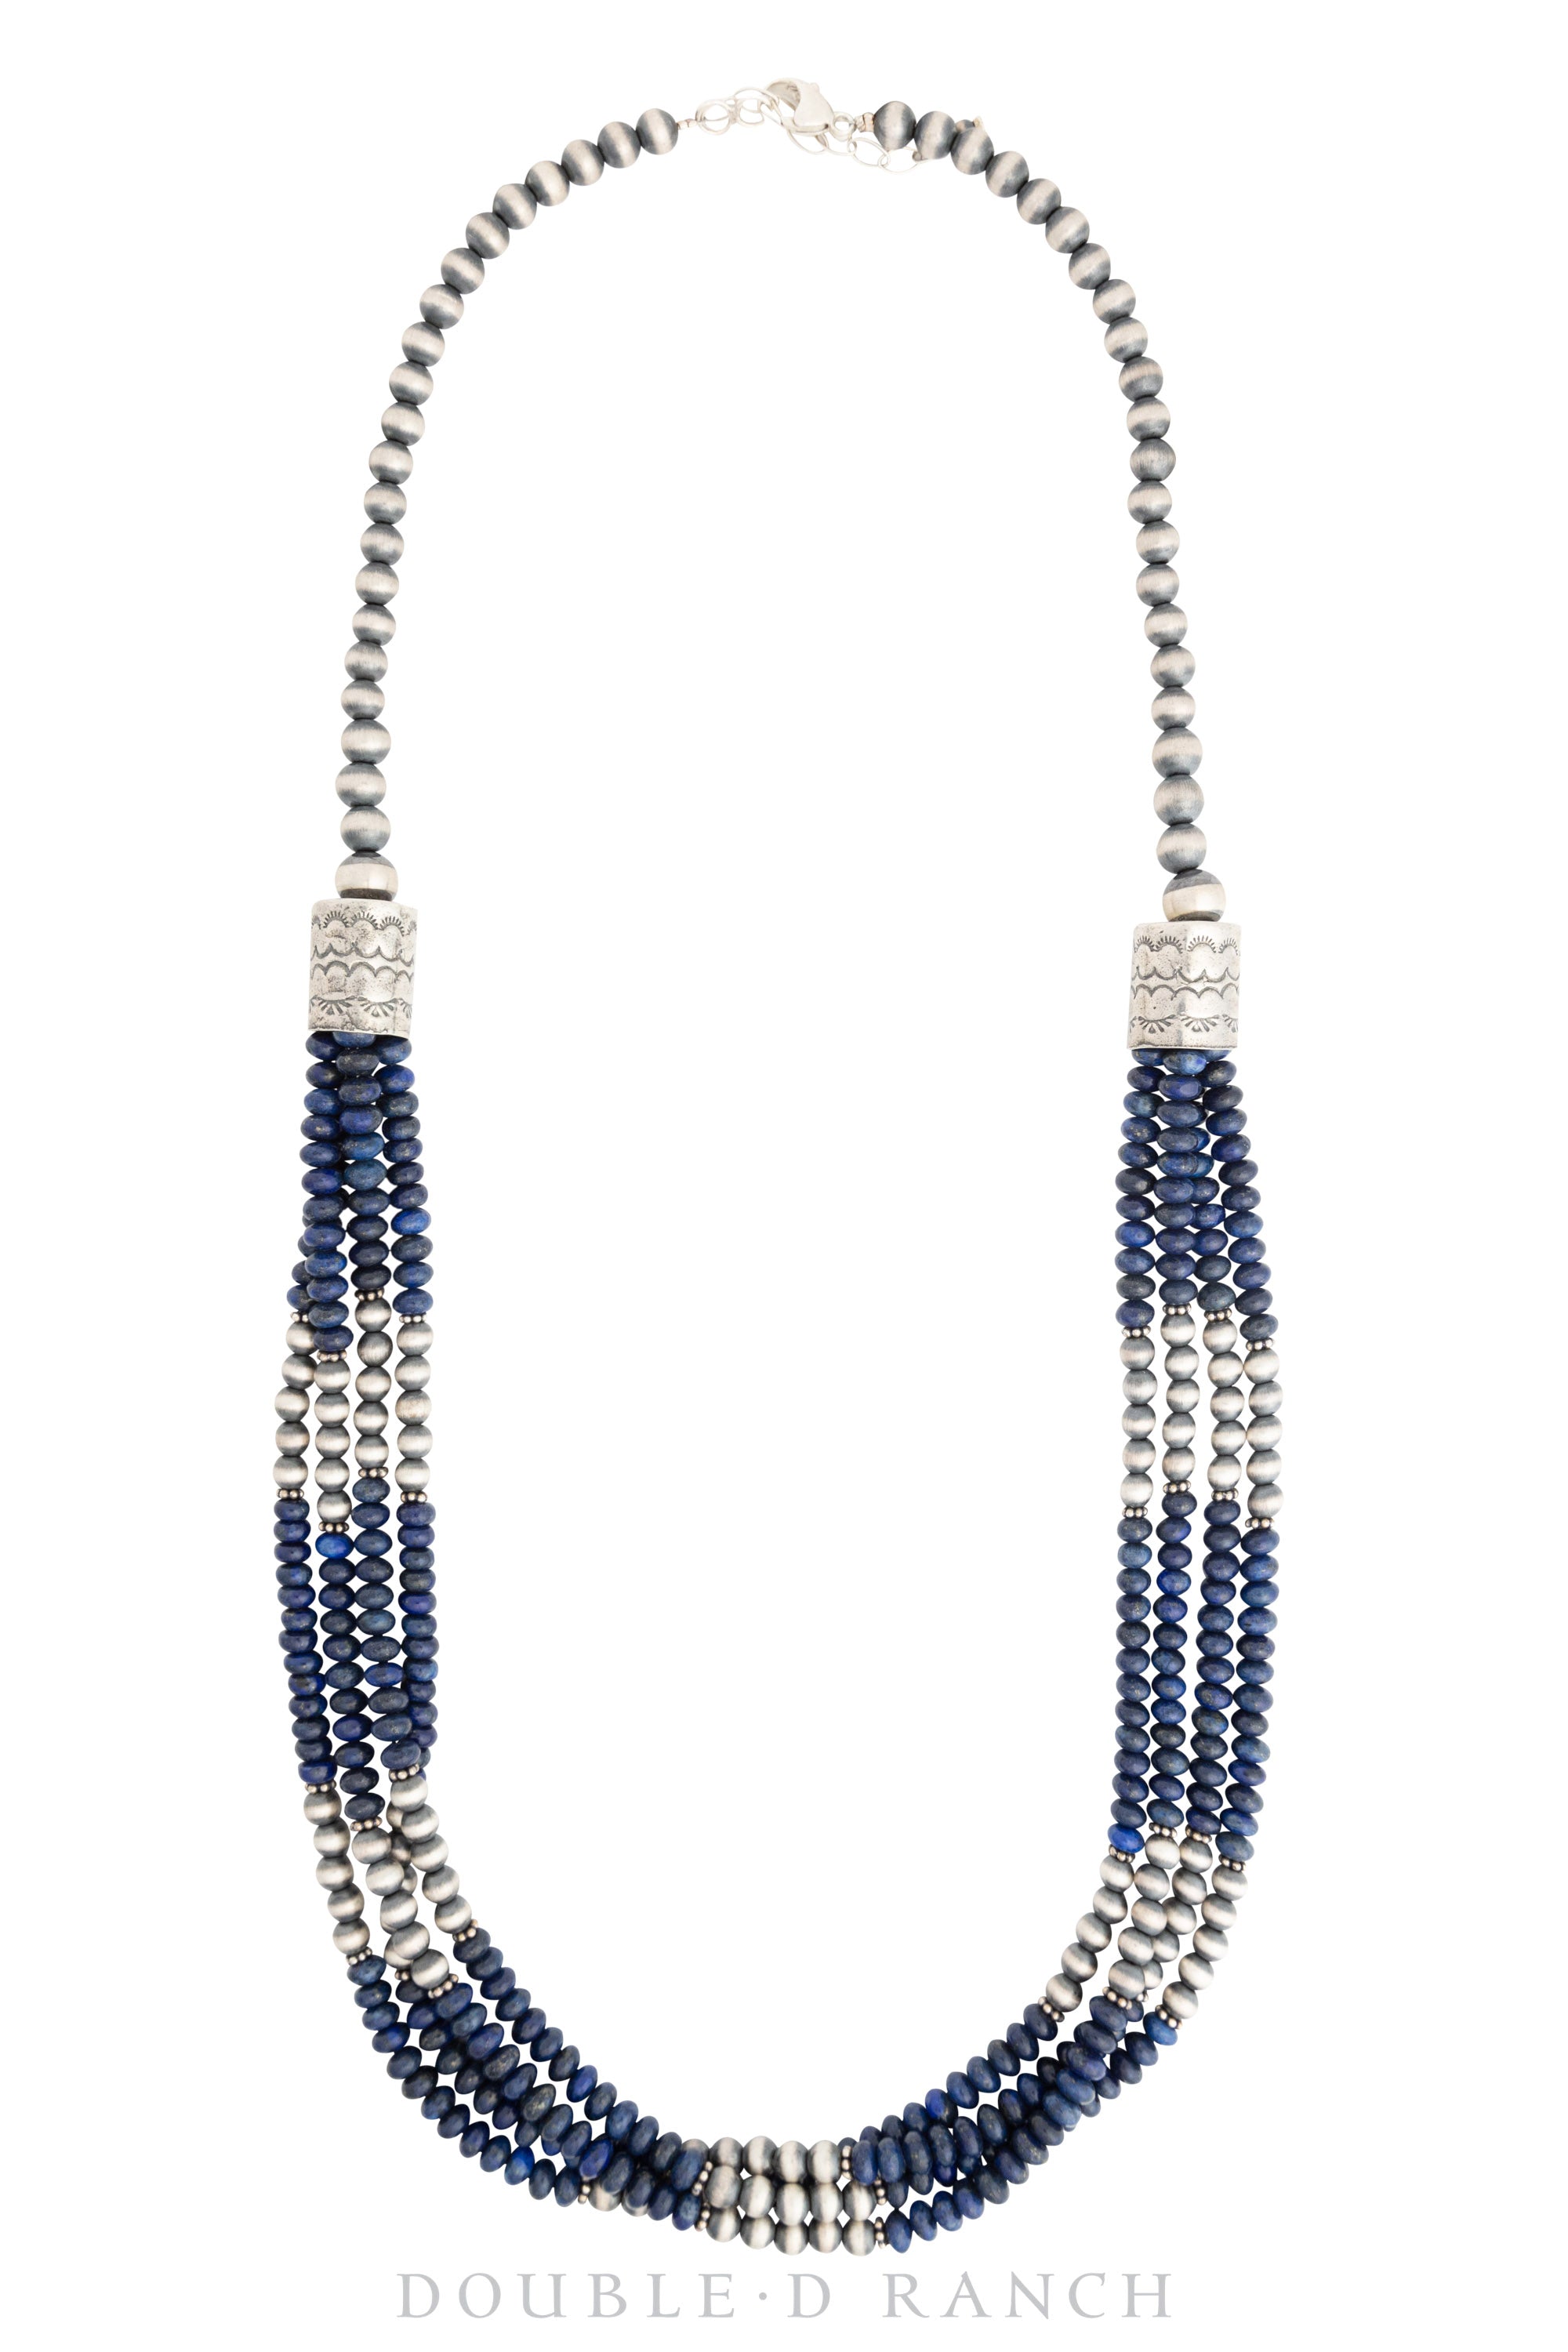 Necklace, Desert Pearls, Lapis, 4 Strands, Contemporary, 3016